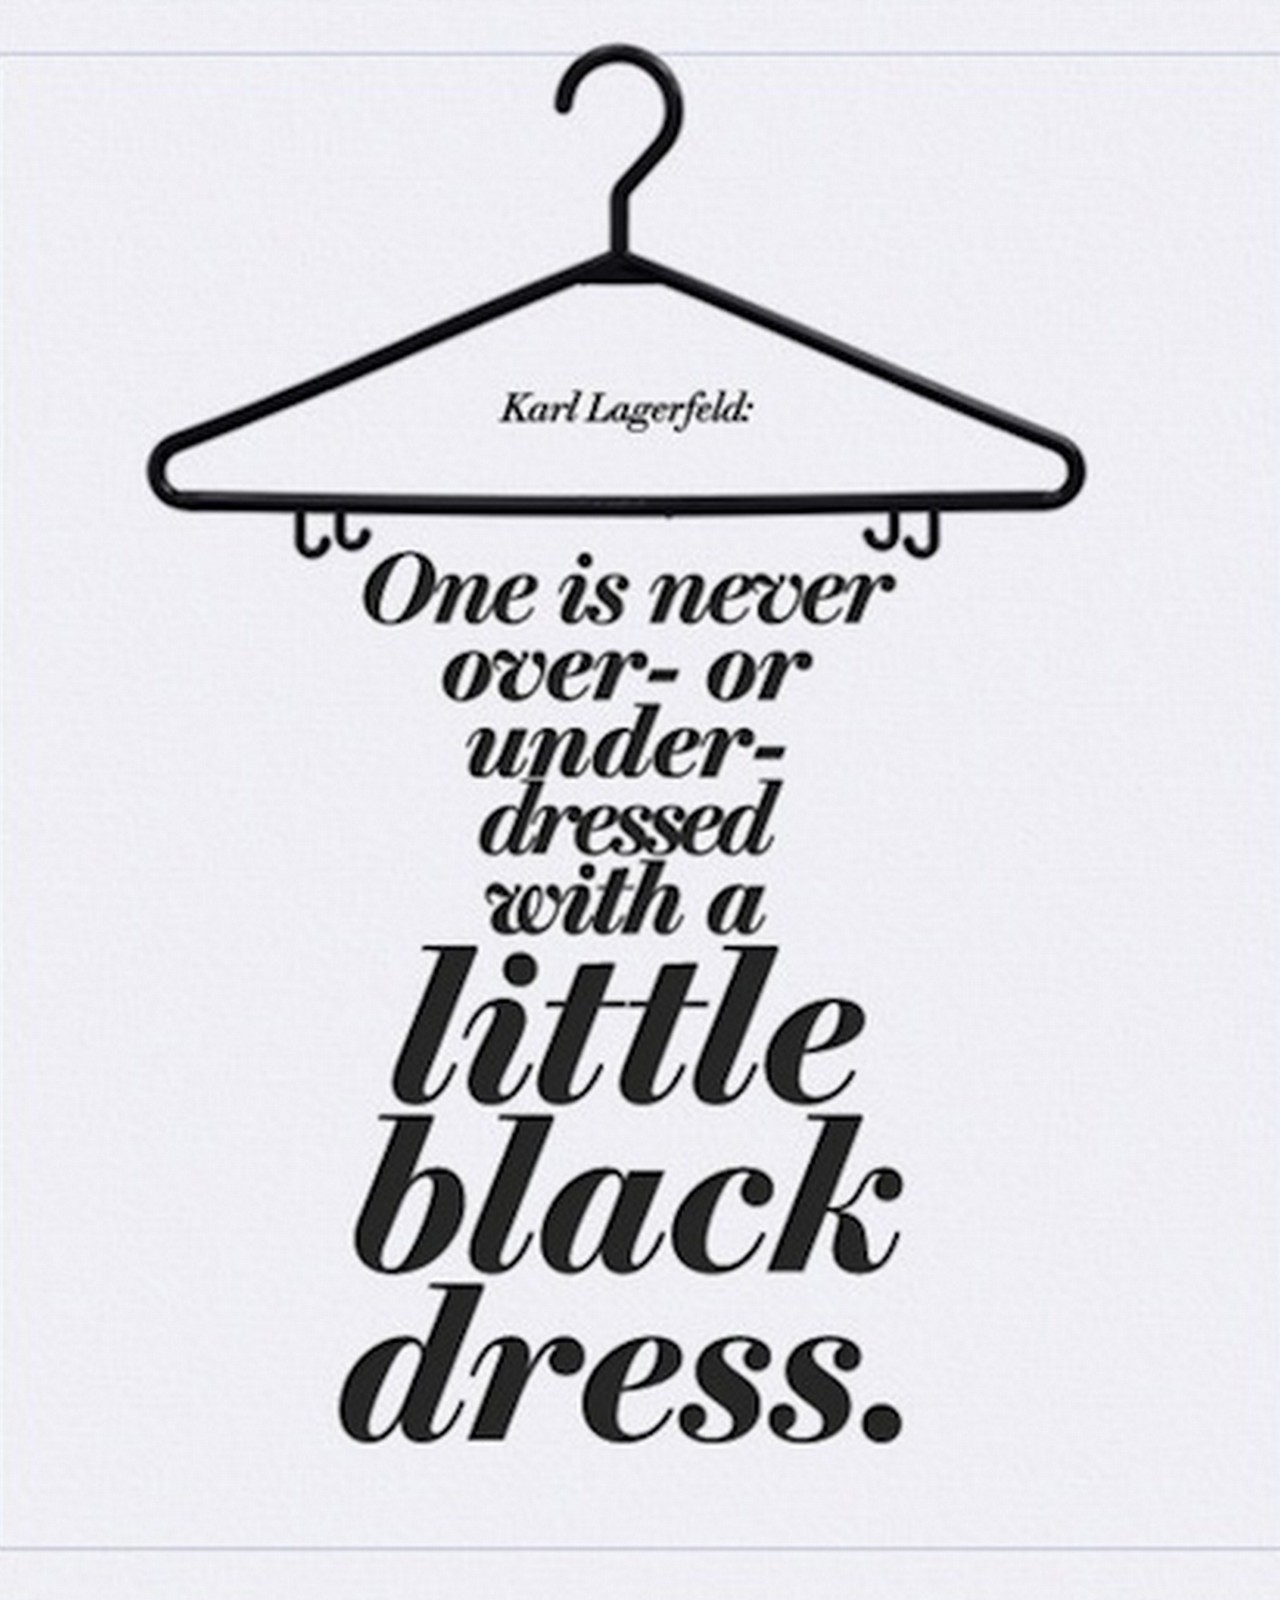 One is never over-dressed or underdressed with a Little Black Dress. Karl Lagerfeld